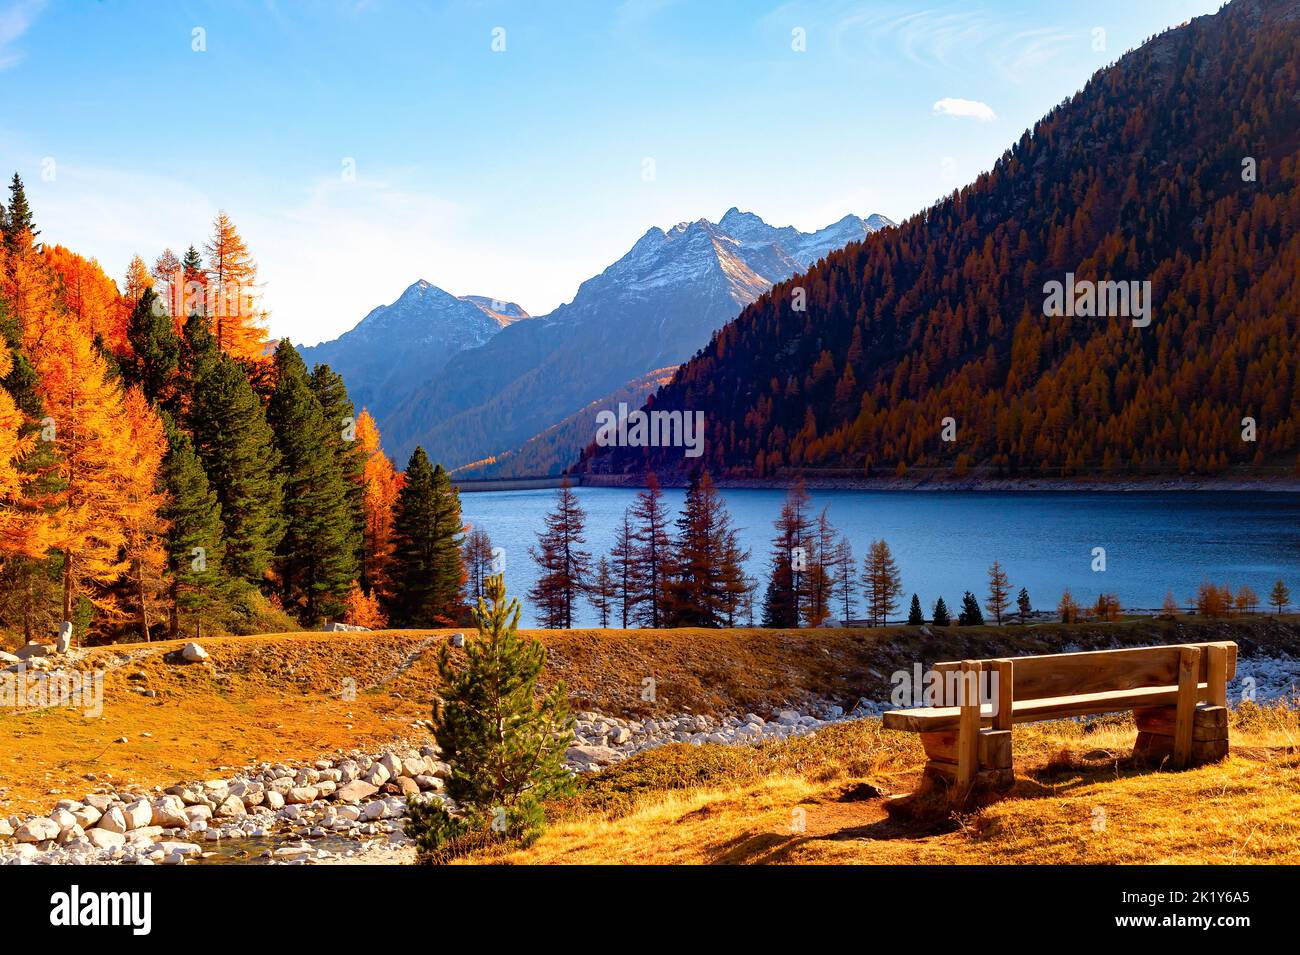 Bench in picturesque place by the lake to enjoy mountains view, autumn golden forest, spruces and rocky peaks in background Stock Photo